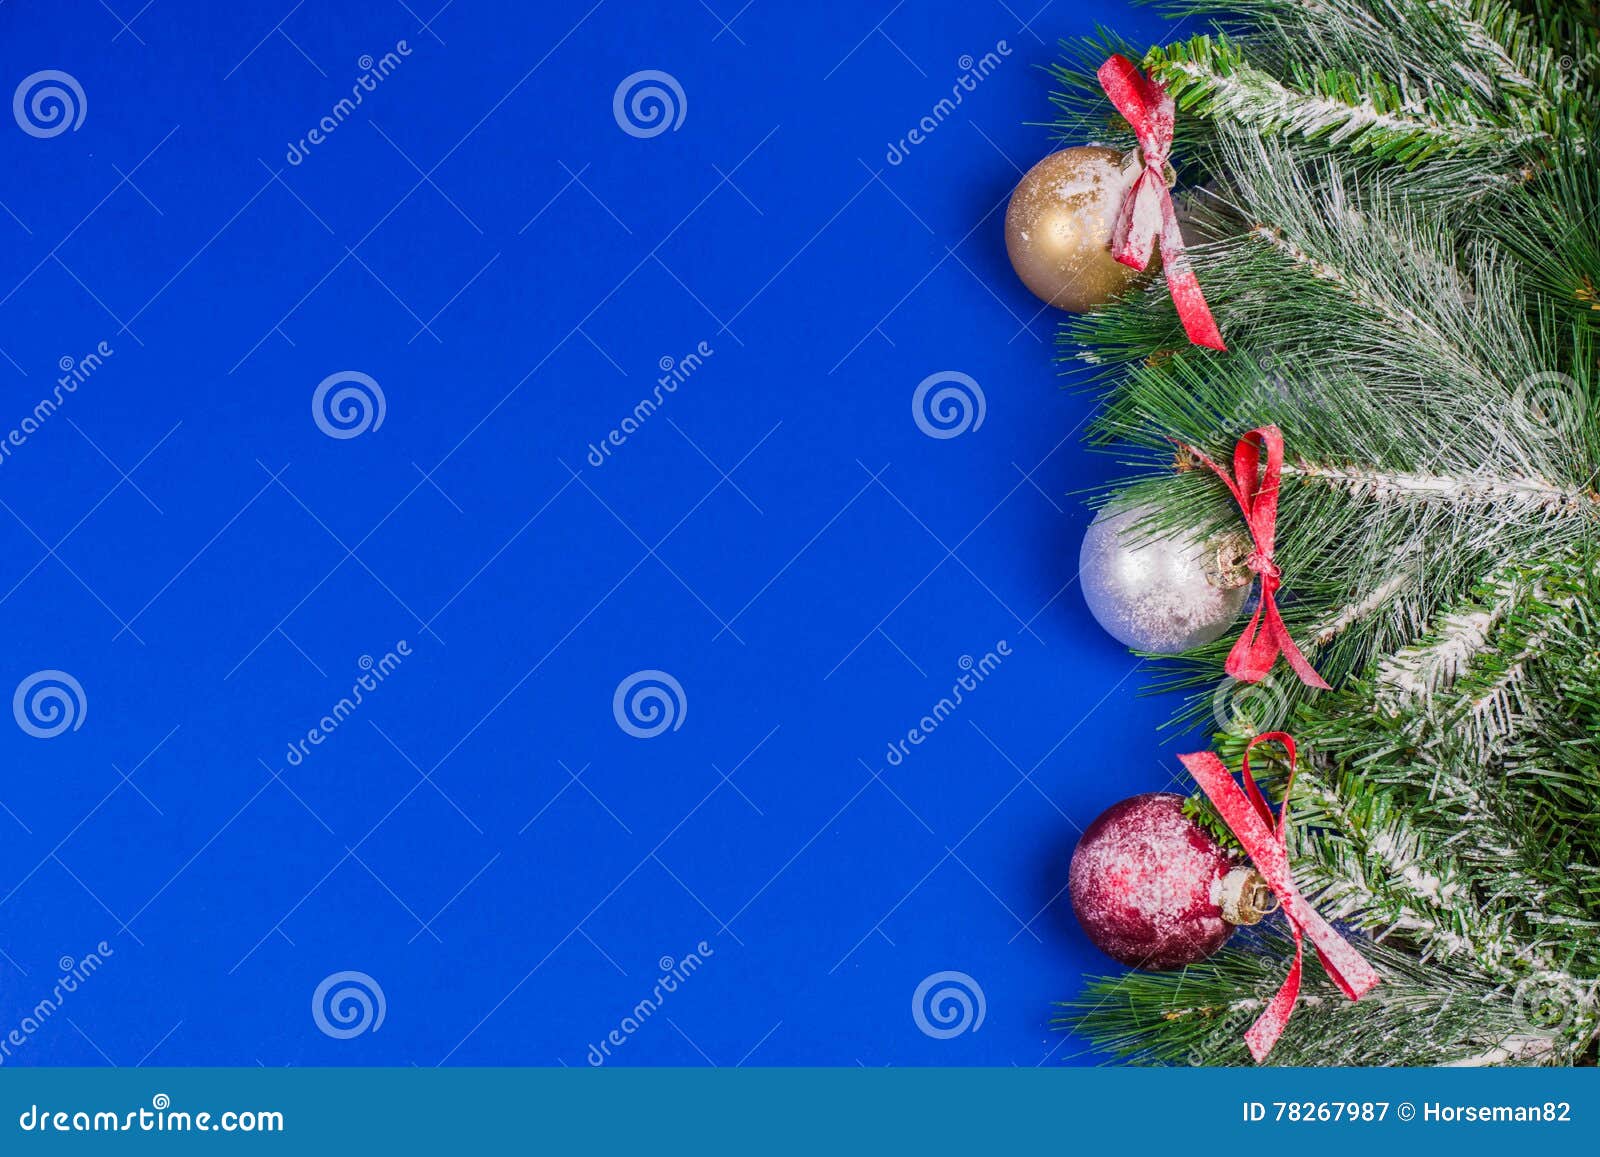 Christmas Greetings Card, Blue Background Stock Image - Image of ...